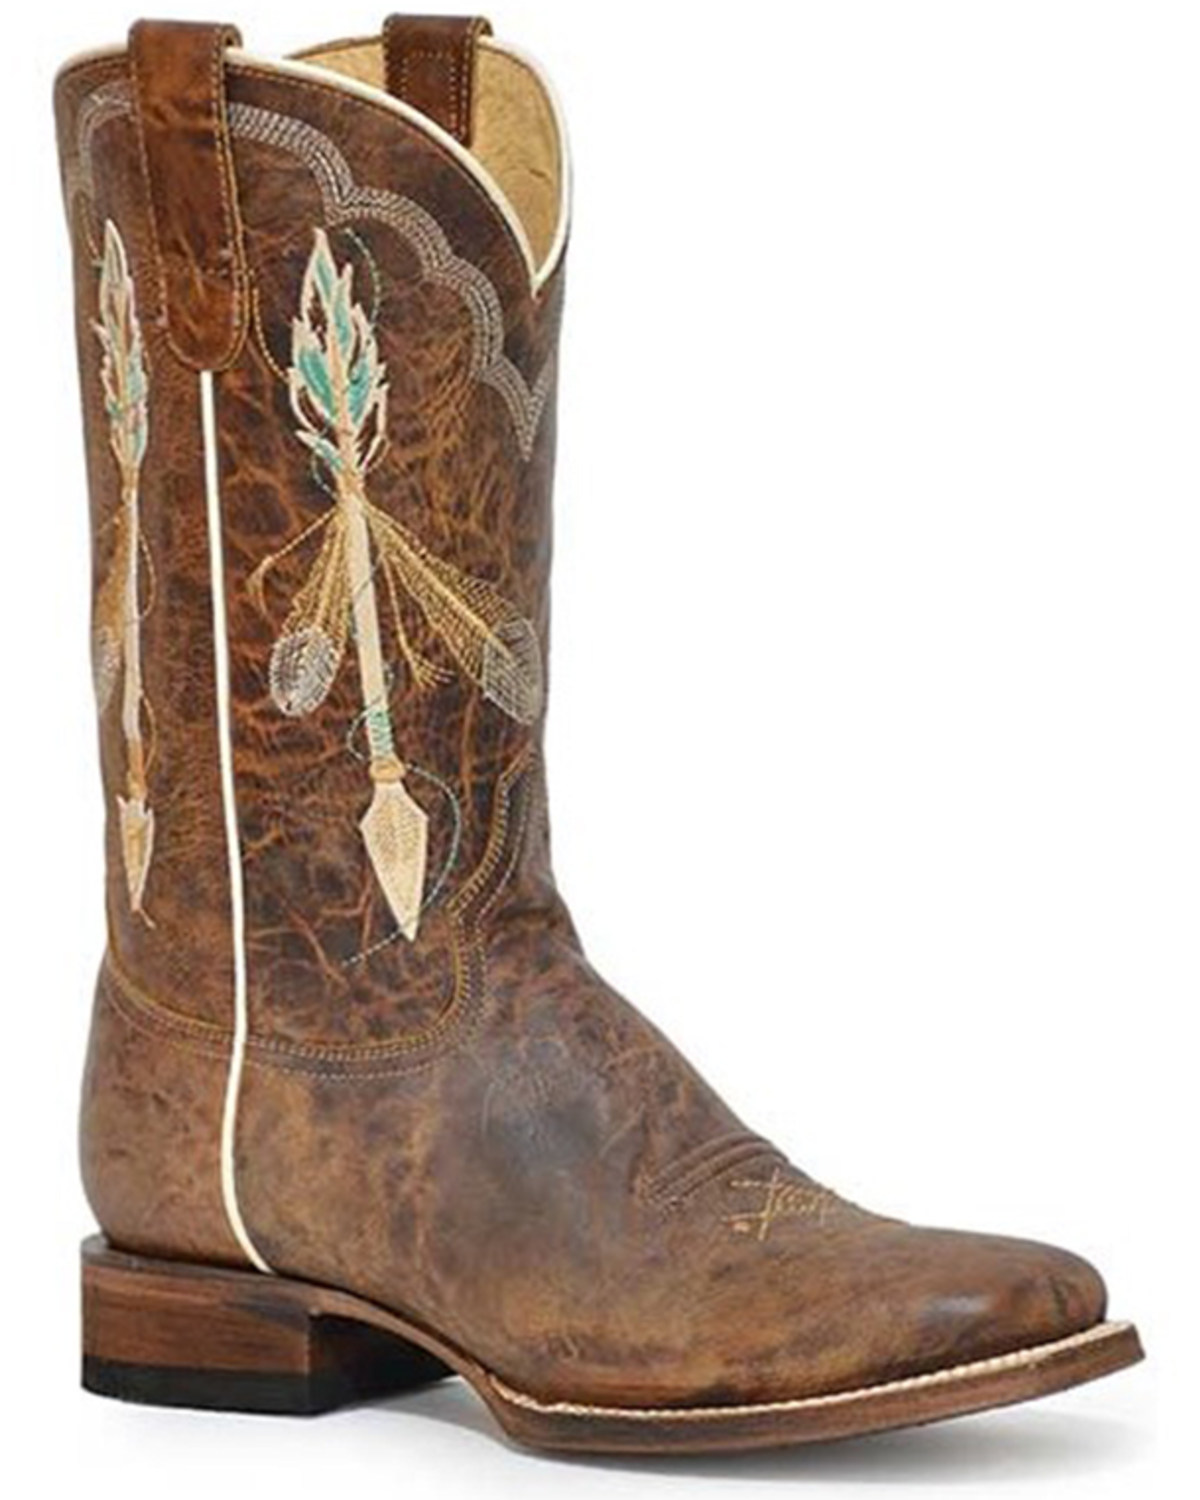 Roper Women's Arrow Feather Wide Calf Embroidered Western Boots - Square Toe